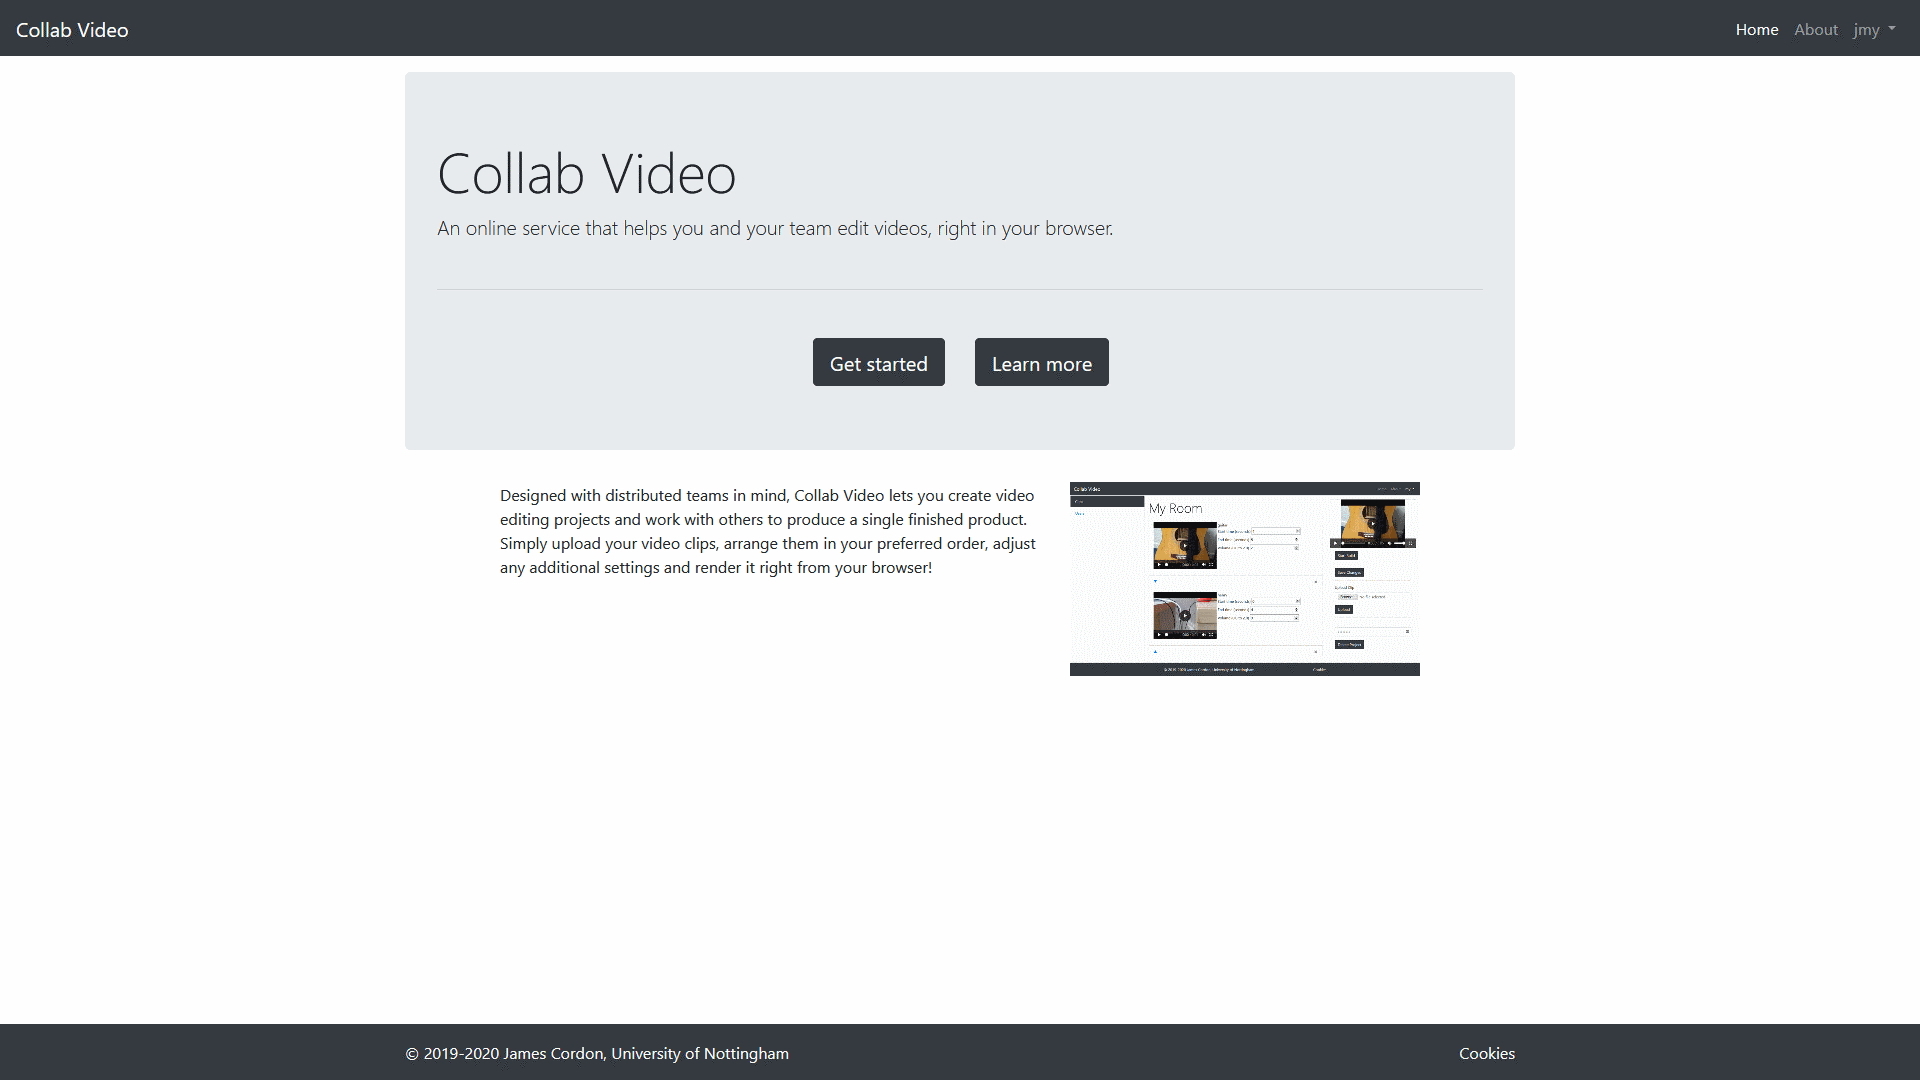 A screenshot of a website titled "Collab Video", with the tagline "An online service that helps you and your team edit videos, right in your browser". A screenshot within the page shows a project page, with some video clips loaded.